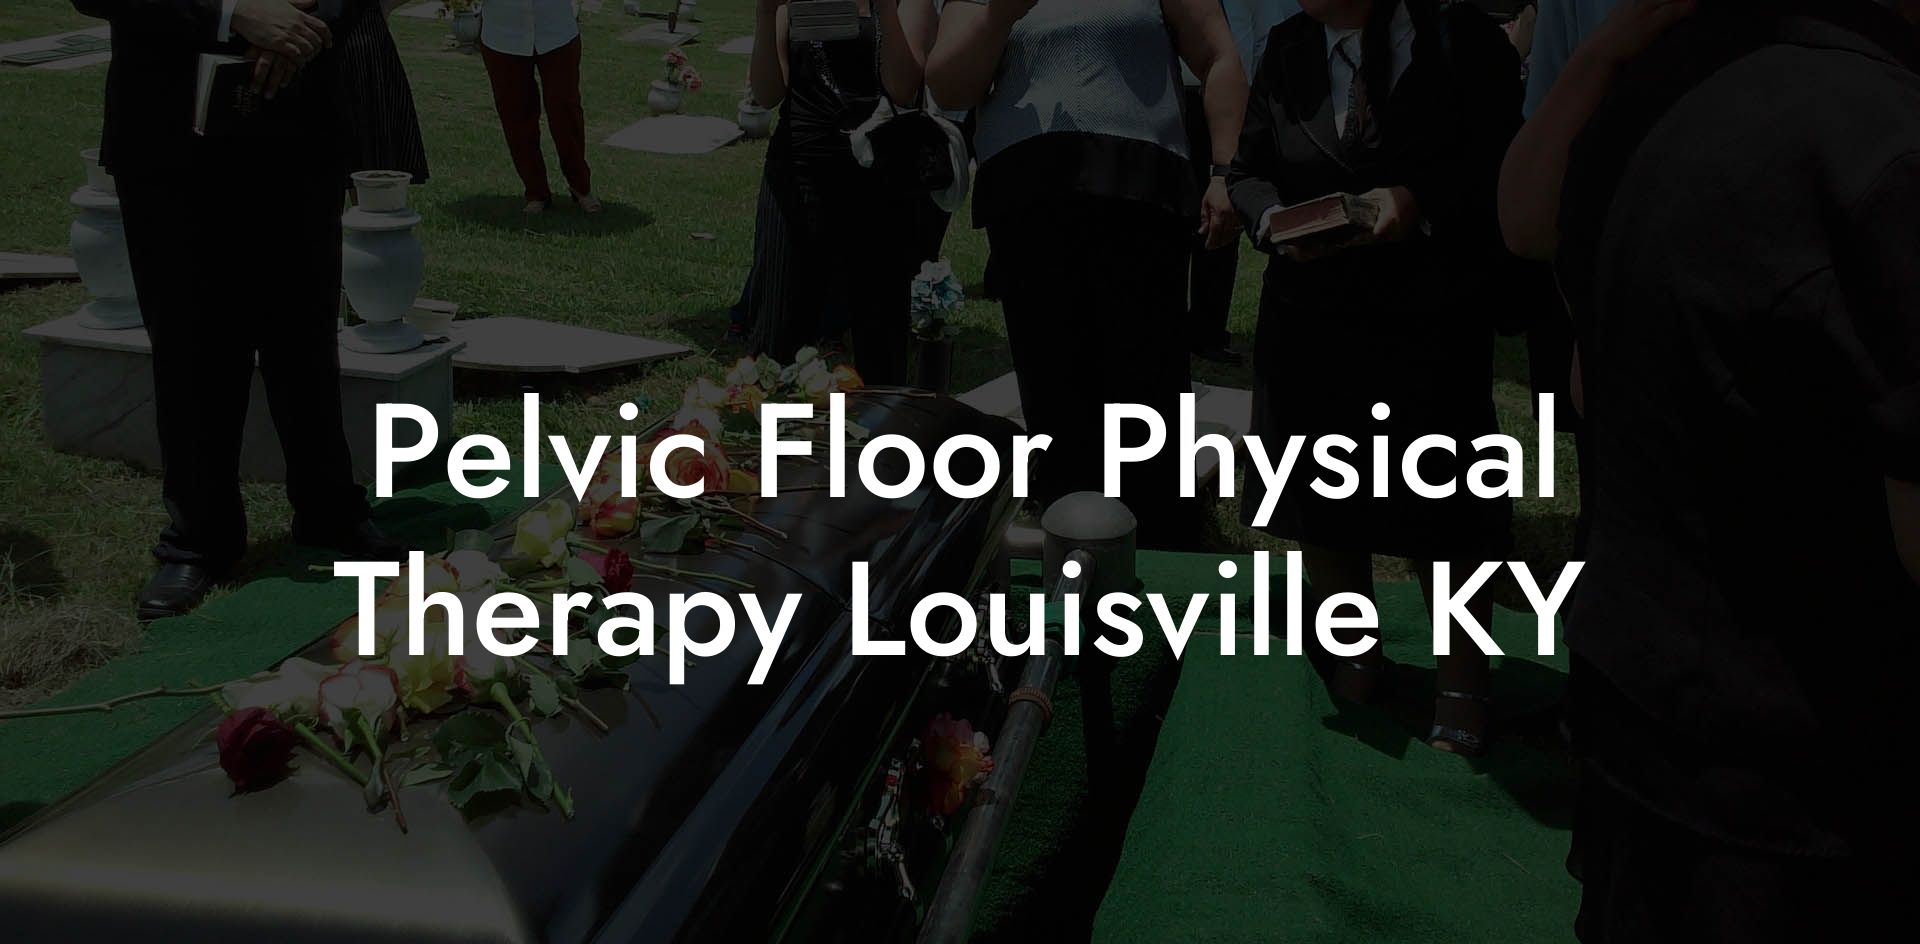 Pelvic Floor Physical Therapy Louisville KY